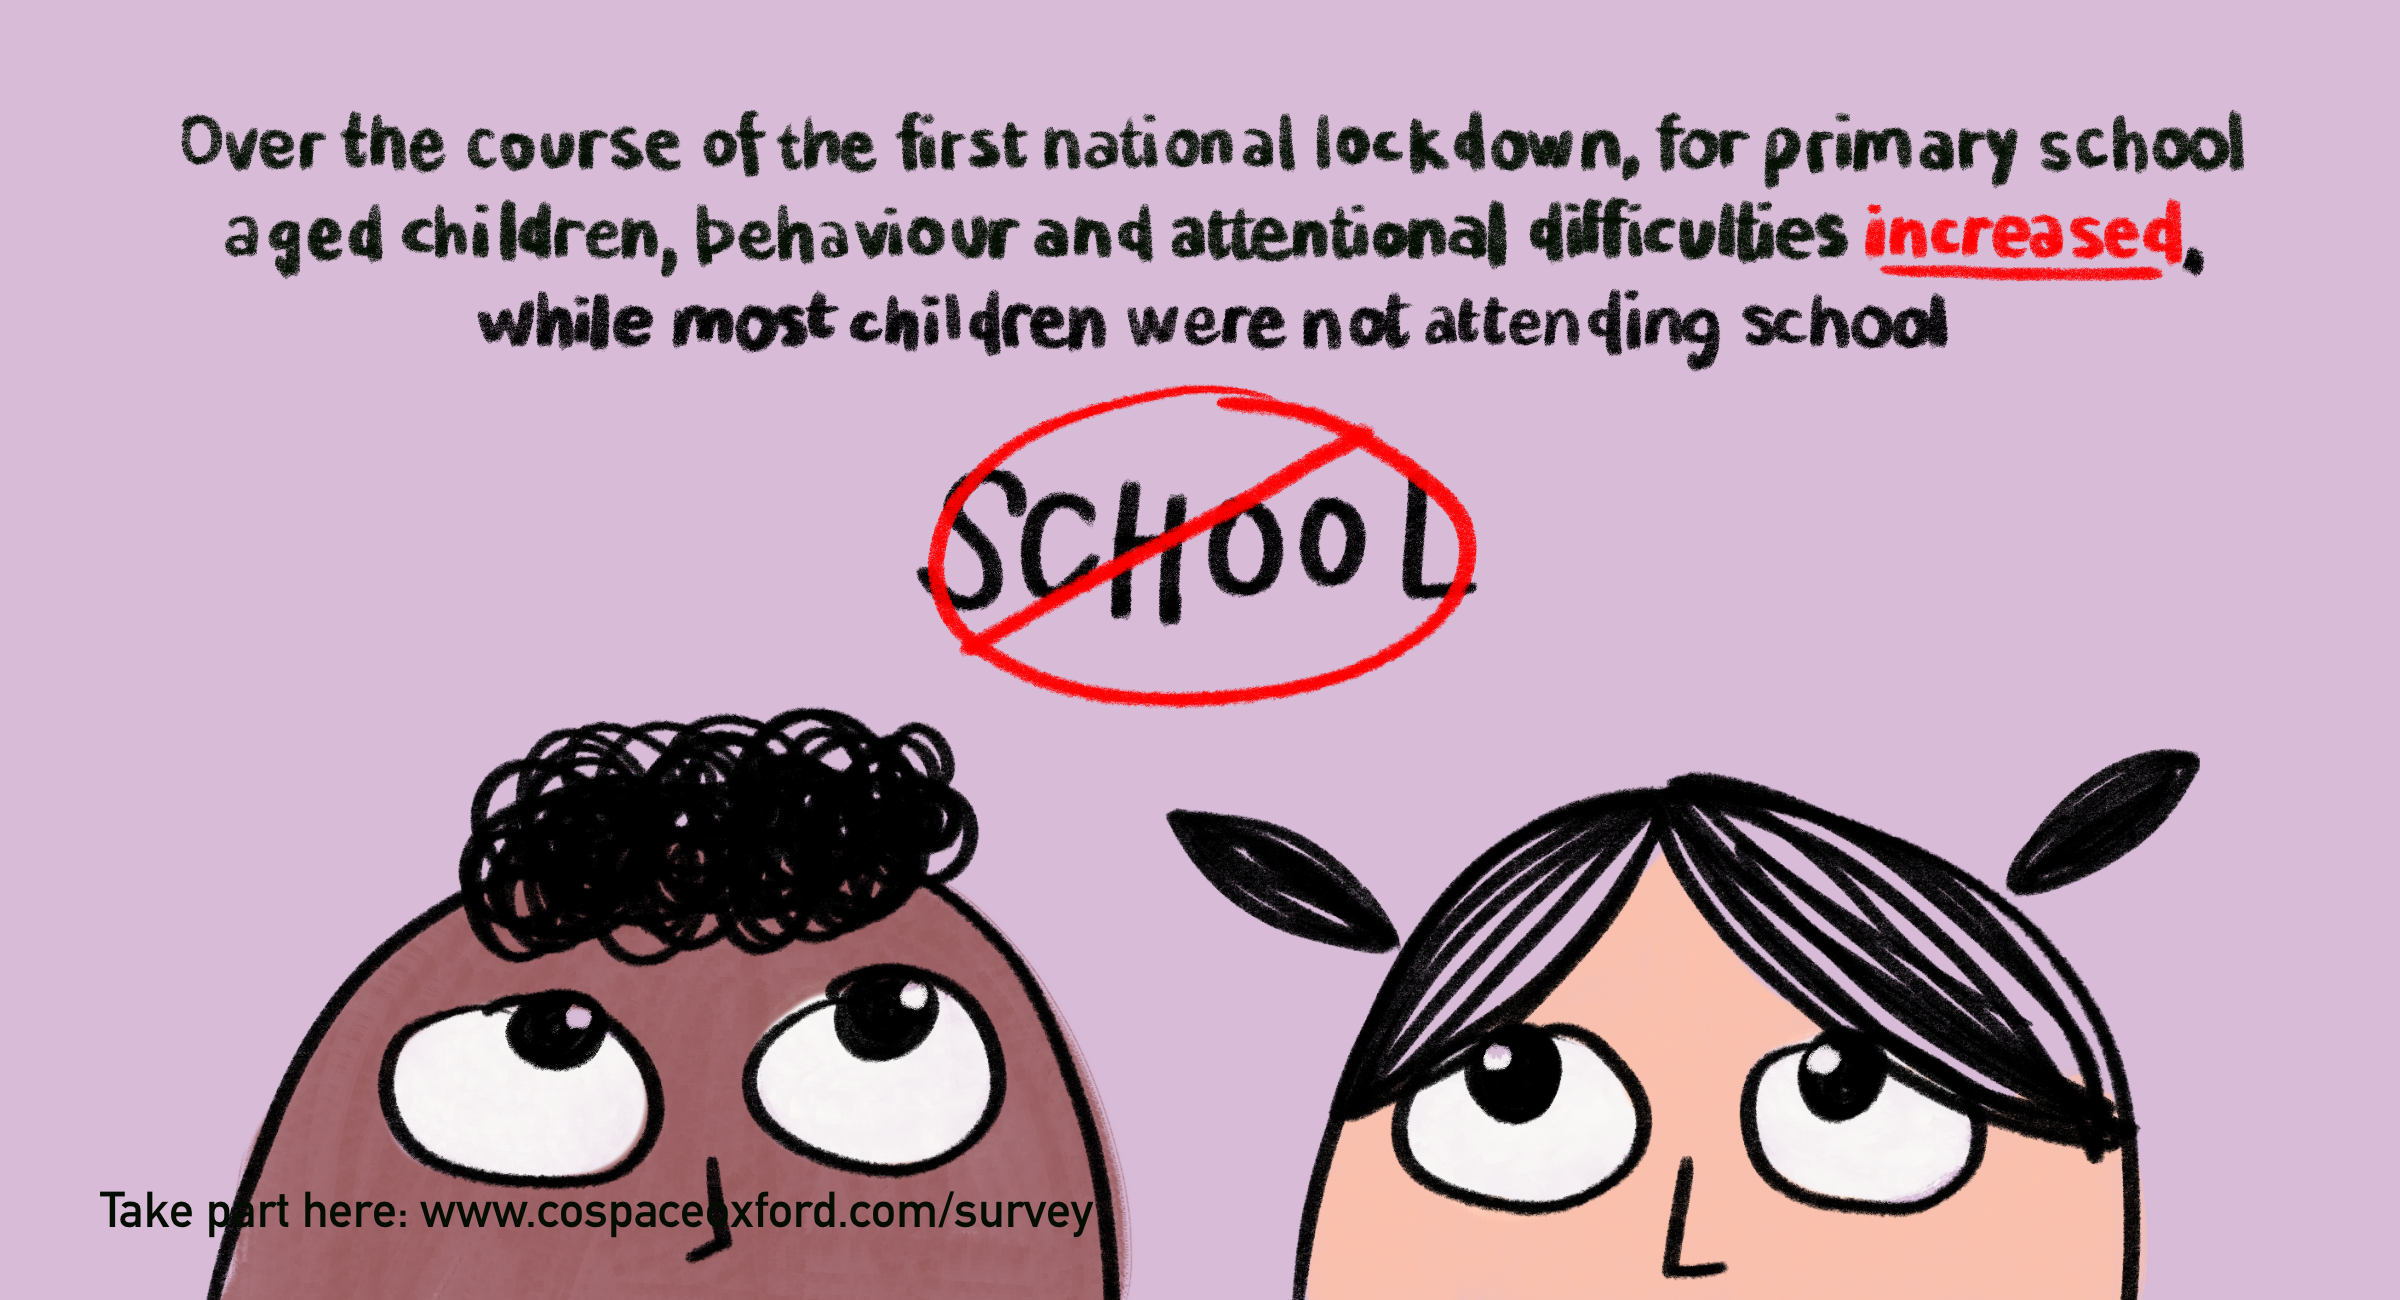 Behavioural and restless/attentional difficulties increased through the lockdown from March to June. This was especially the case in primary school aged children (4-10 years old).